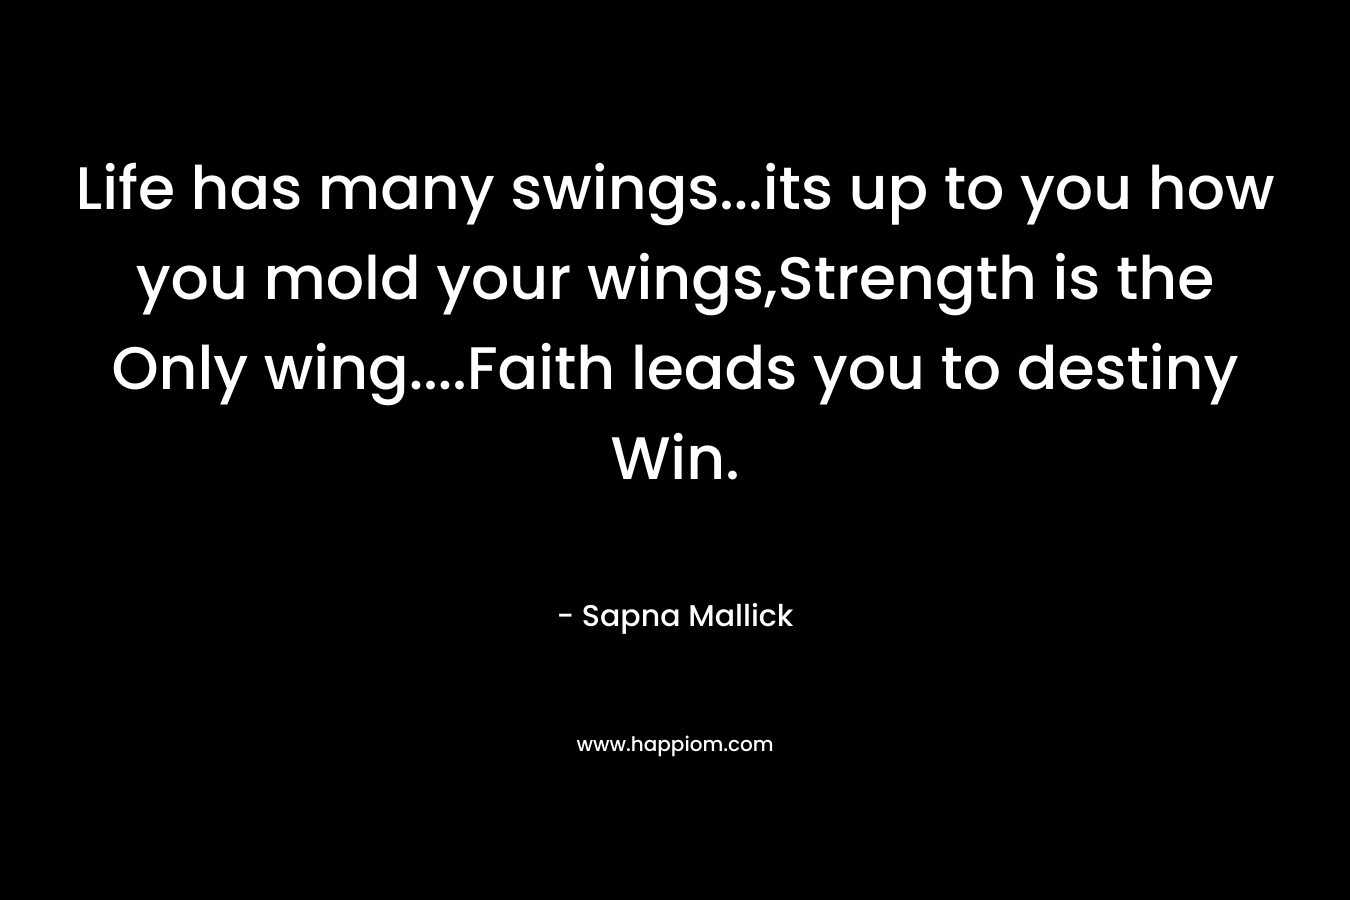 Life has many swings…its up to you how you mold your wings,Strength is the Only wing….Faith leads you to destiny Win. – Sapna Mallick